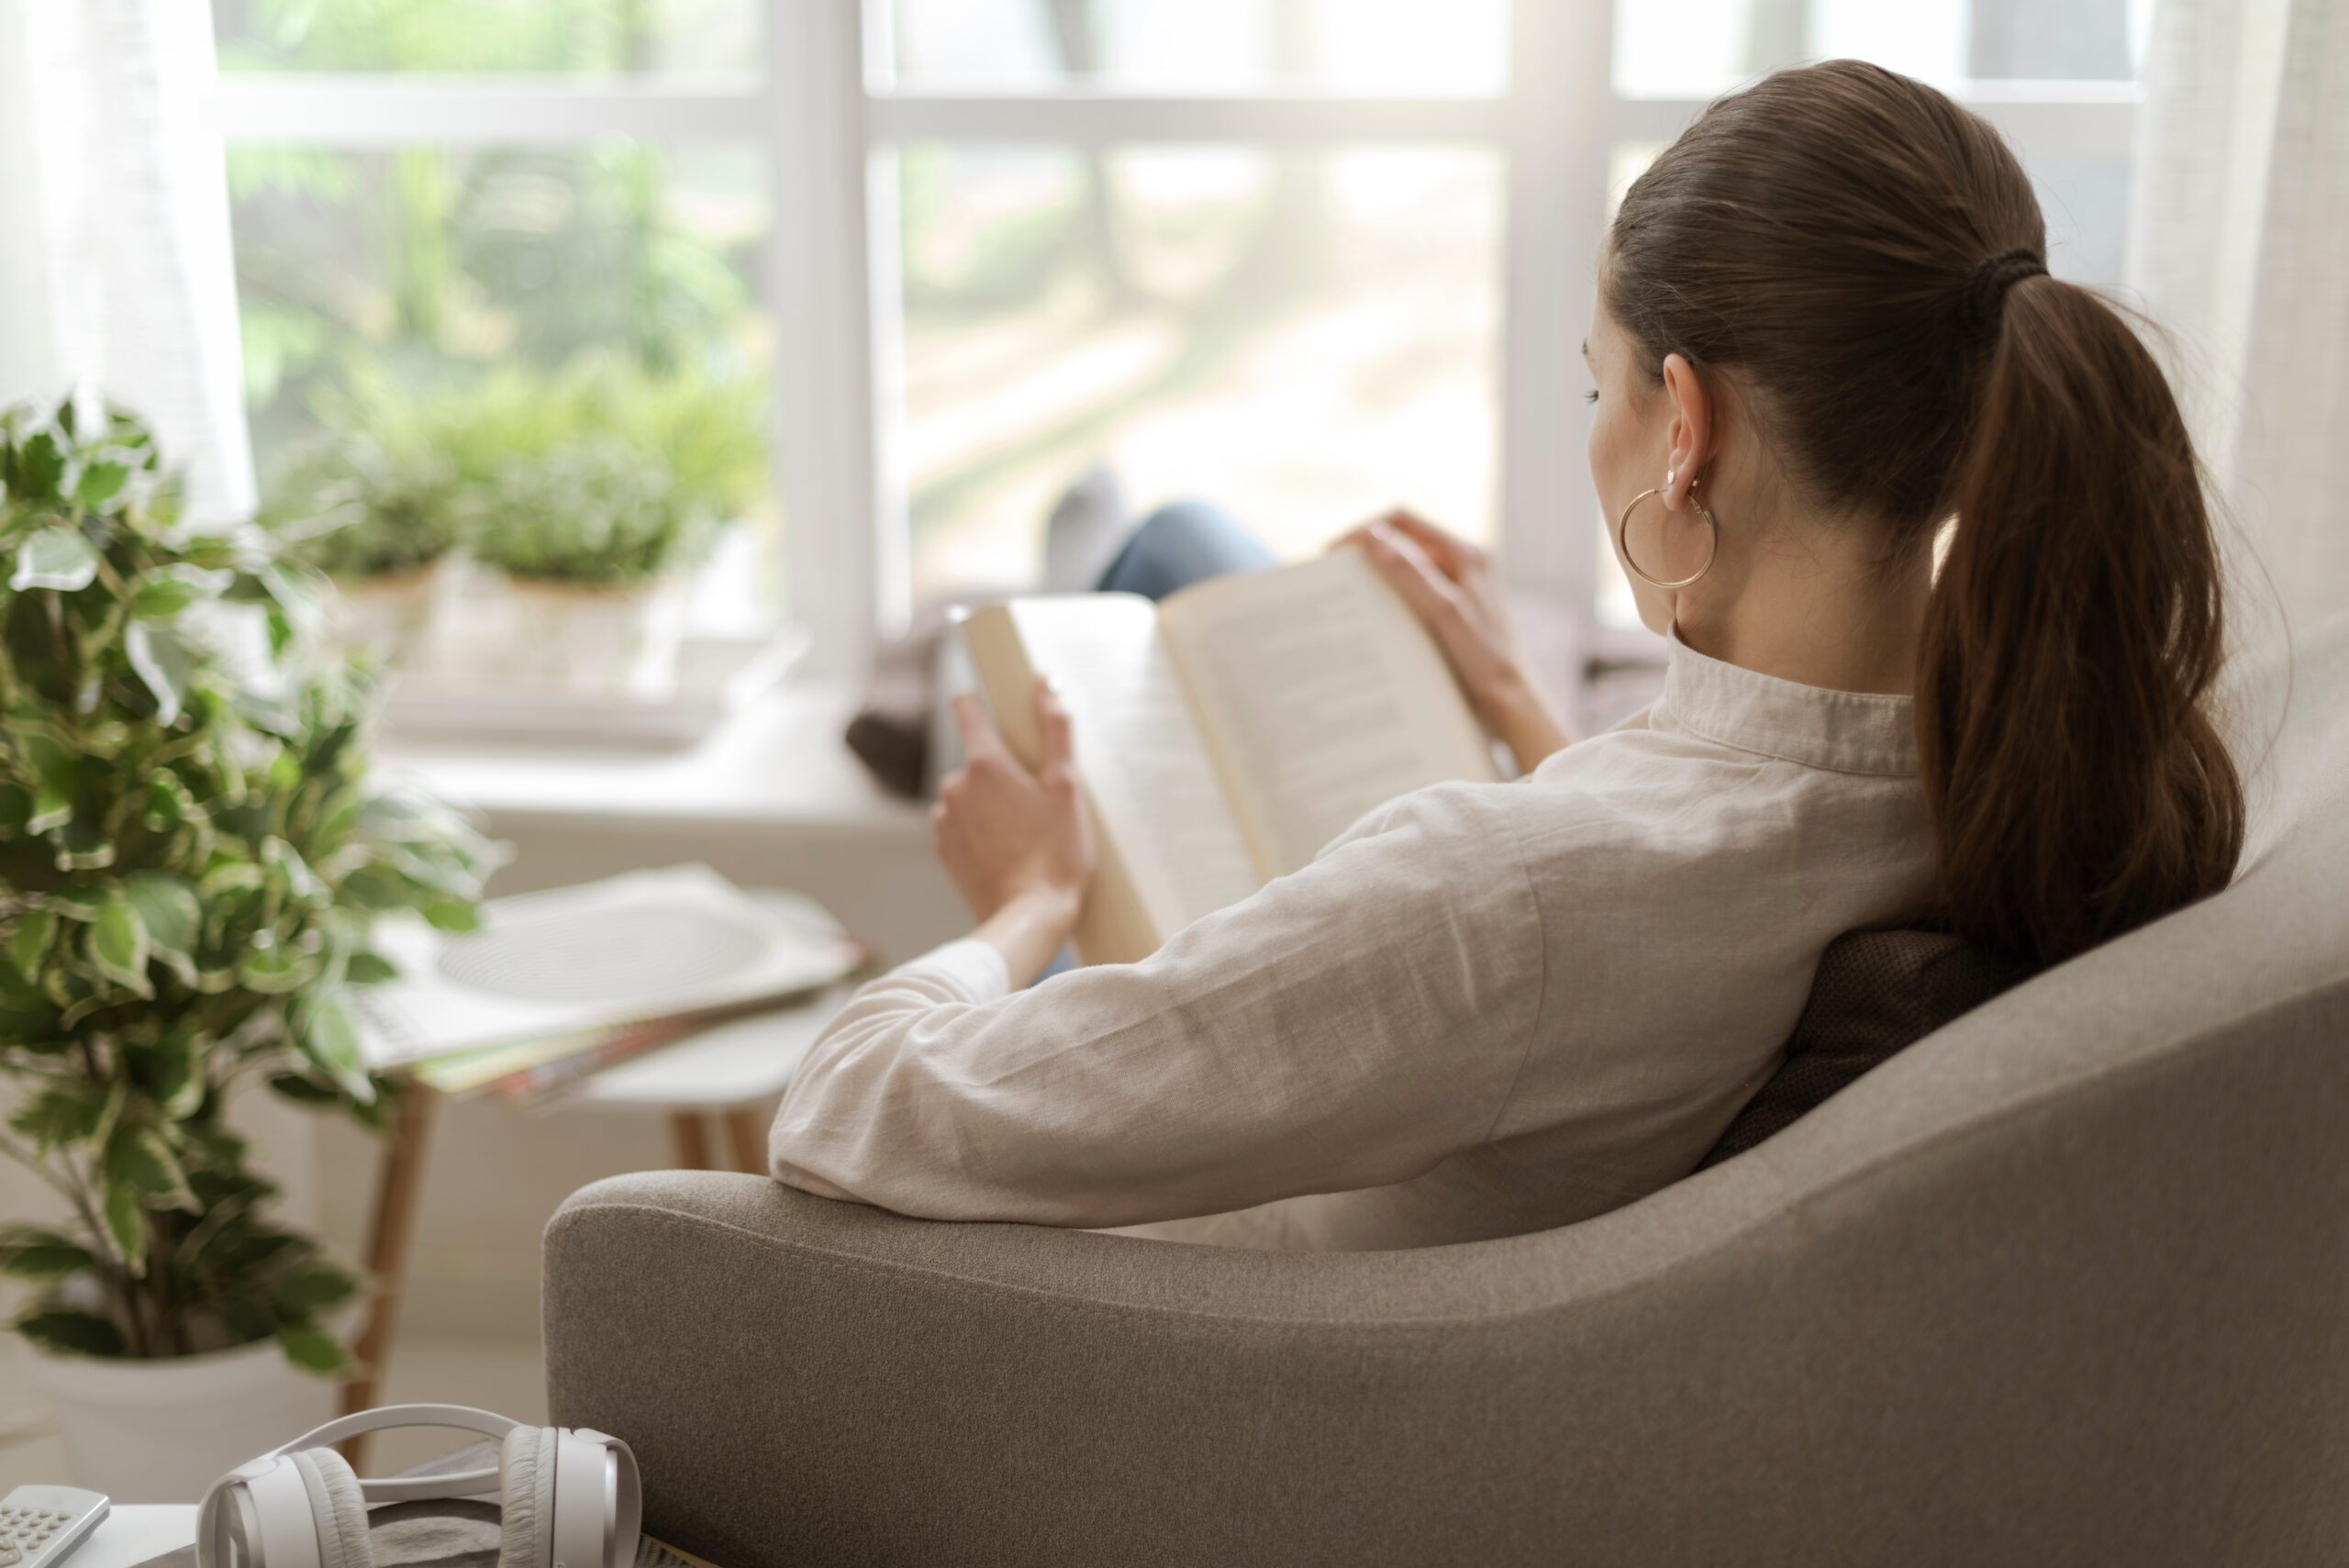 Woman relaxing at home next to a window, sitting in an armchair and reading a book